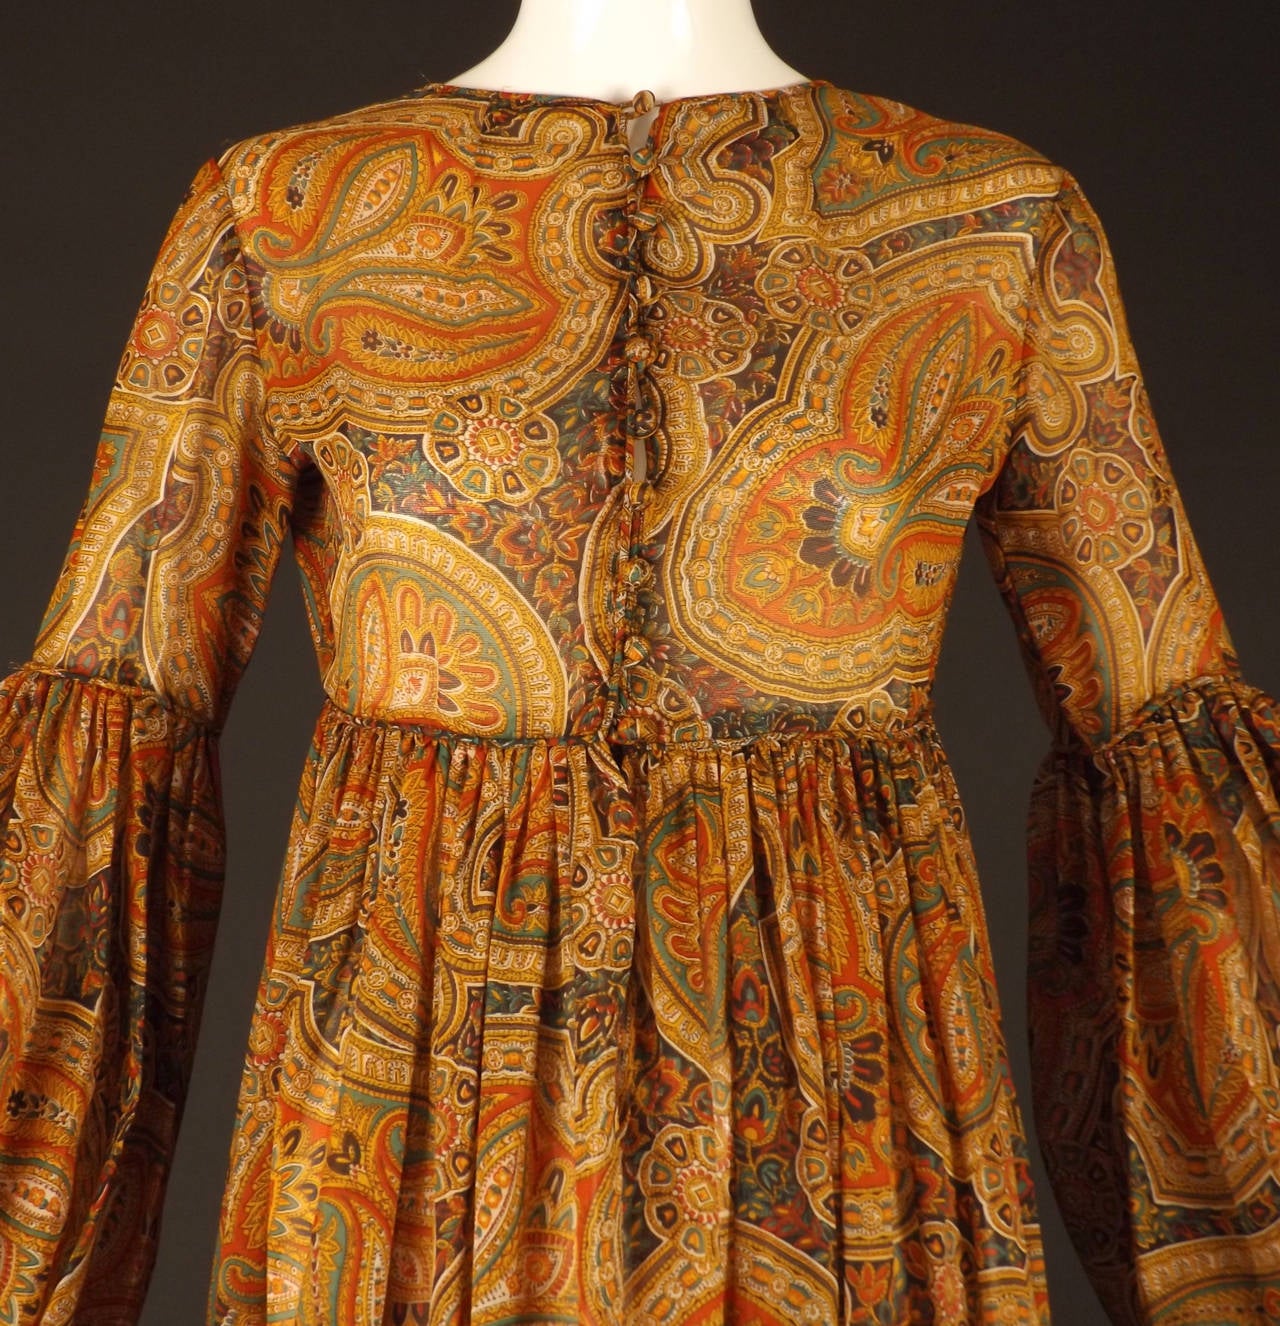 Fabulous boho chic peasant dress from c.1970 in a lightweight paisley printed wool gauze.  The colors are red, orange, white, green and black. Covered button closures down the front of the dress to the slightly raised, piped waistline. Long, set in